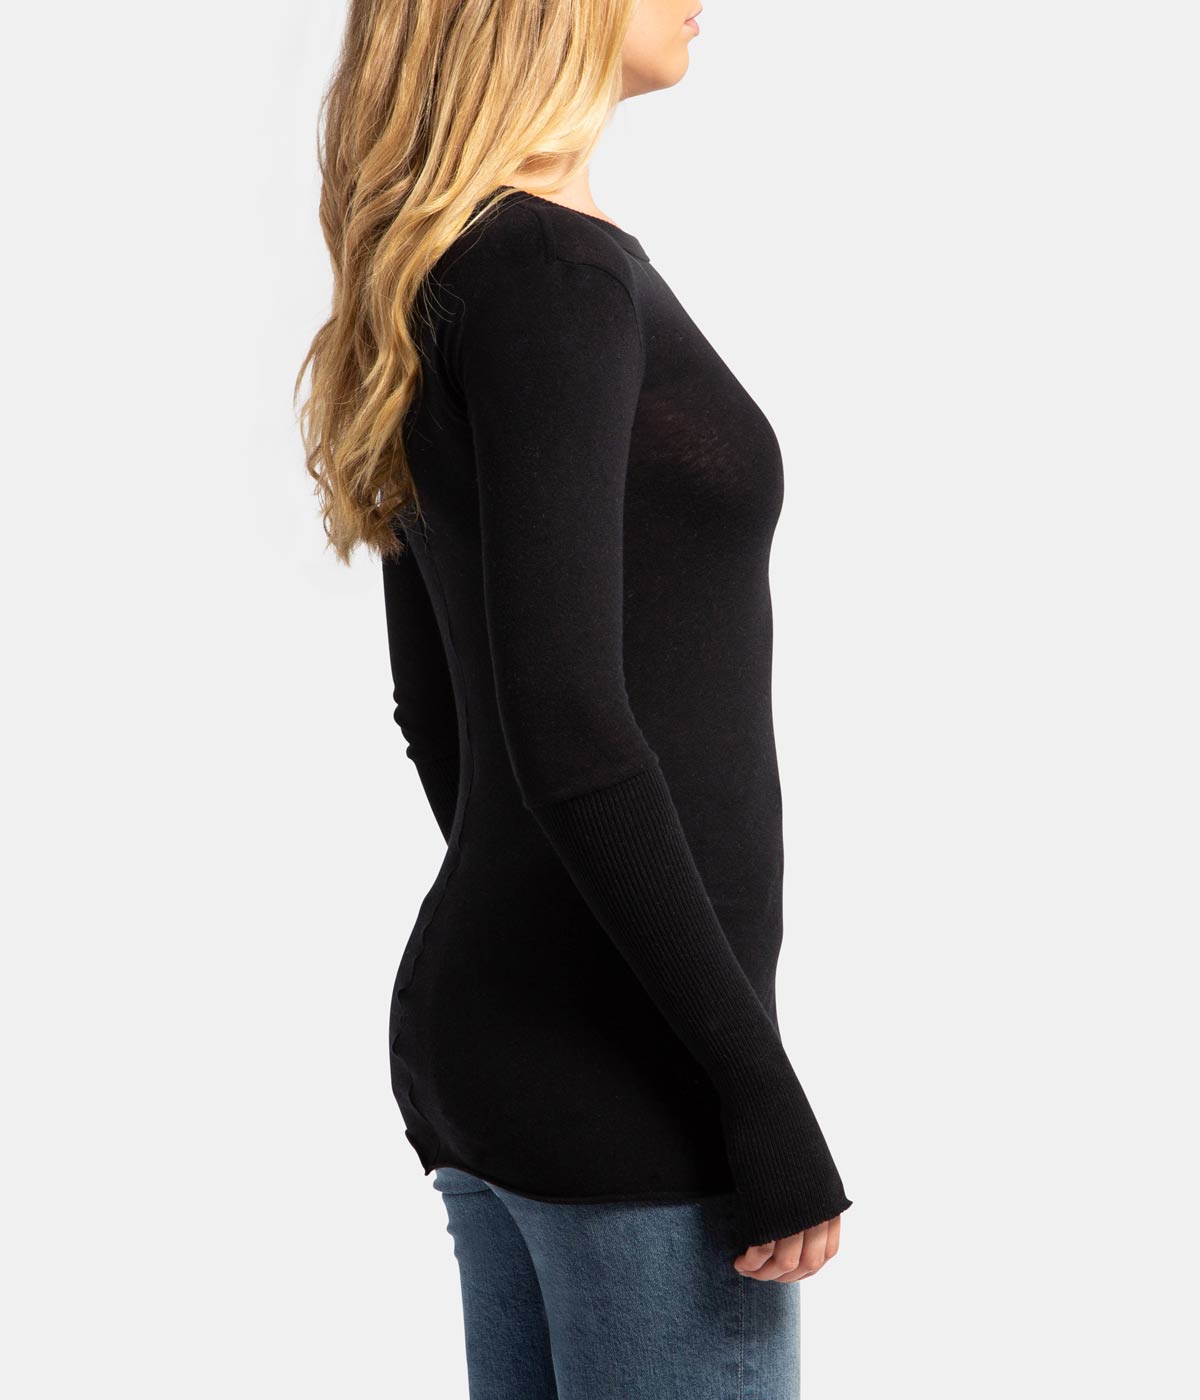 Cashmere Crew Neck Fitted Long Sleeve Top in Black